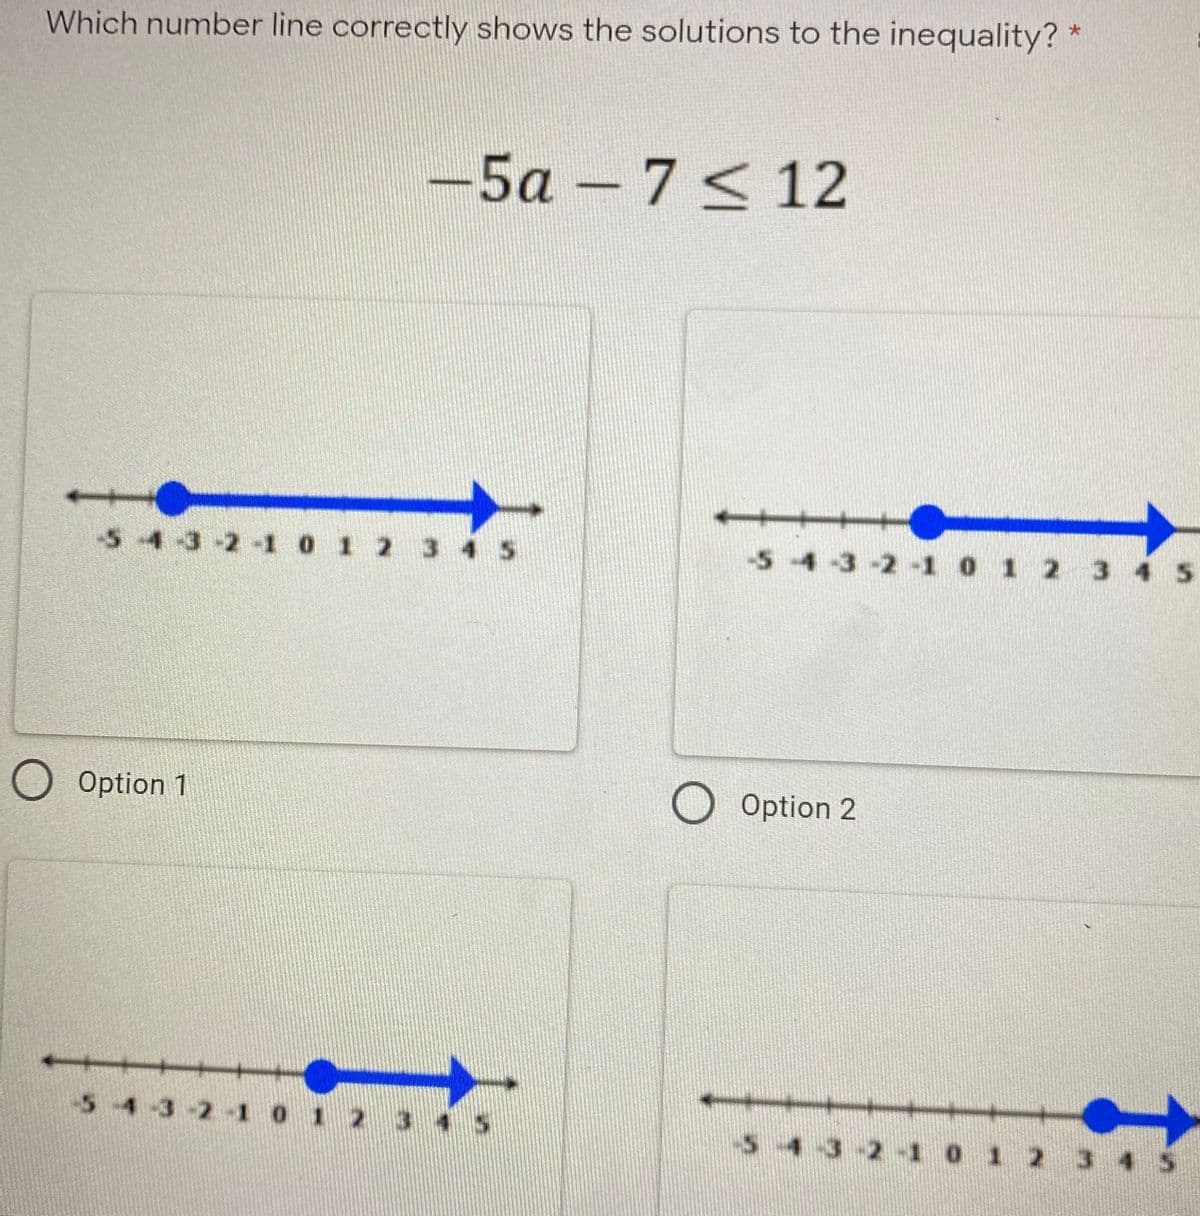 Which number line correctly shows the solutions to the inequality? *
-5a – 7 < 12
-5-4-3-2-1 0 1 2 3
-54-3-2-1 0 1 2 3 4 5
O Option 1
O Option 2
54 3-2 1 0 1 :
4 5
-54-3-2-1 0 1 2
